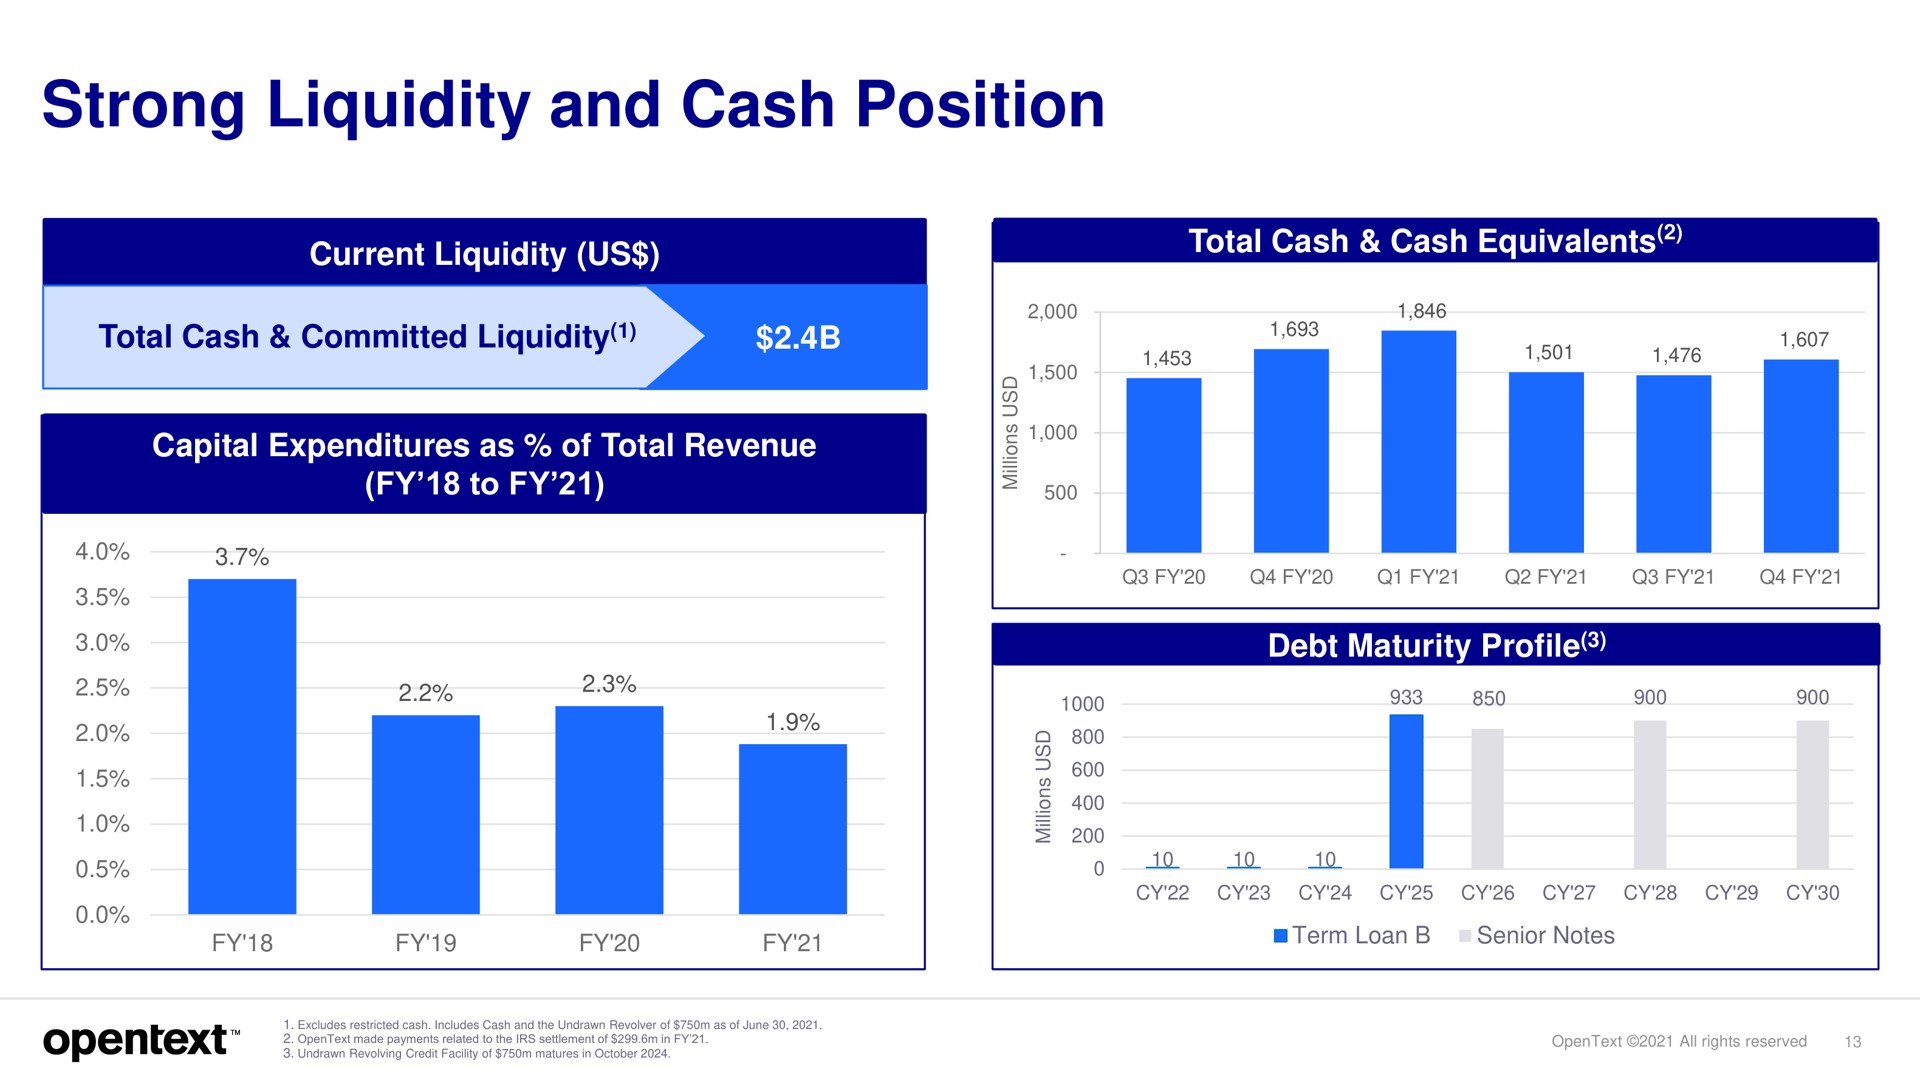 strong liquidity and cash position | OpenText